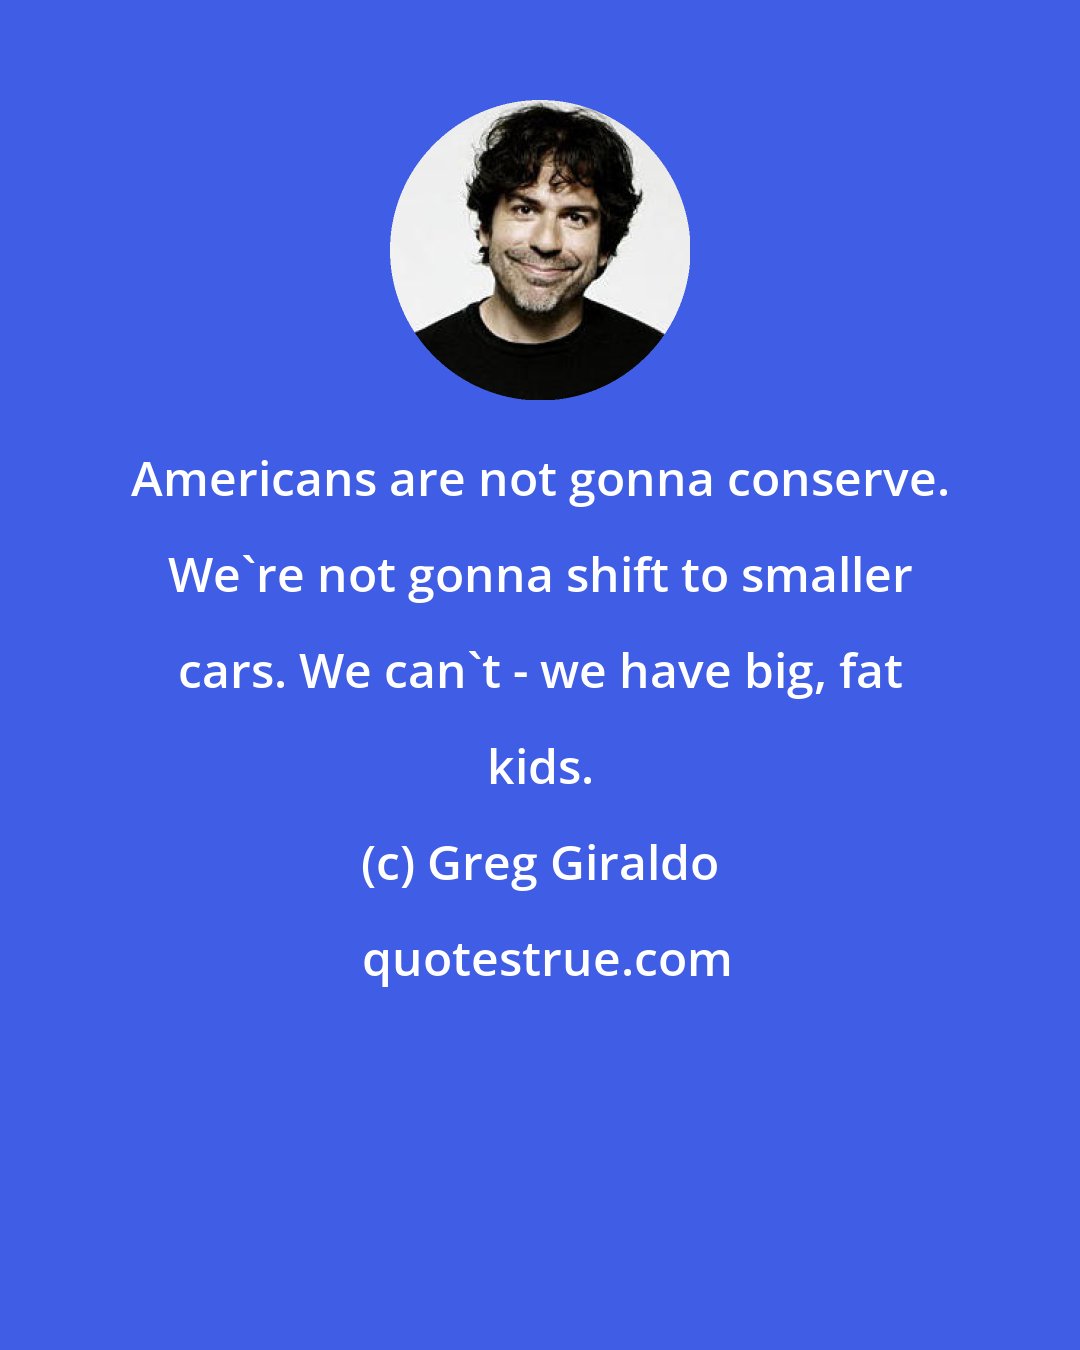 Greg Giraldo: Americans are not gonna conserve. We're not gonna shift to smaller cars. We can't - we have big, fat kids.